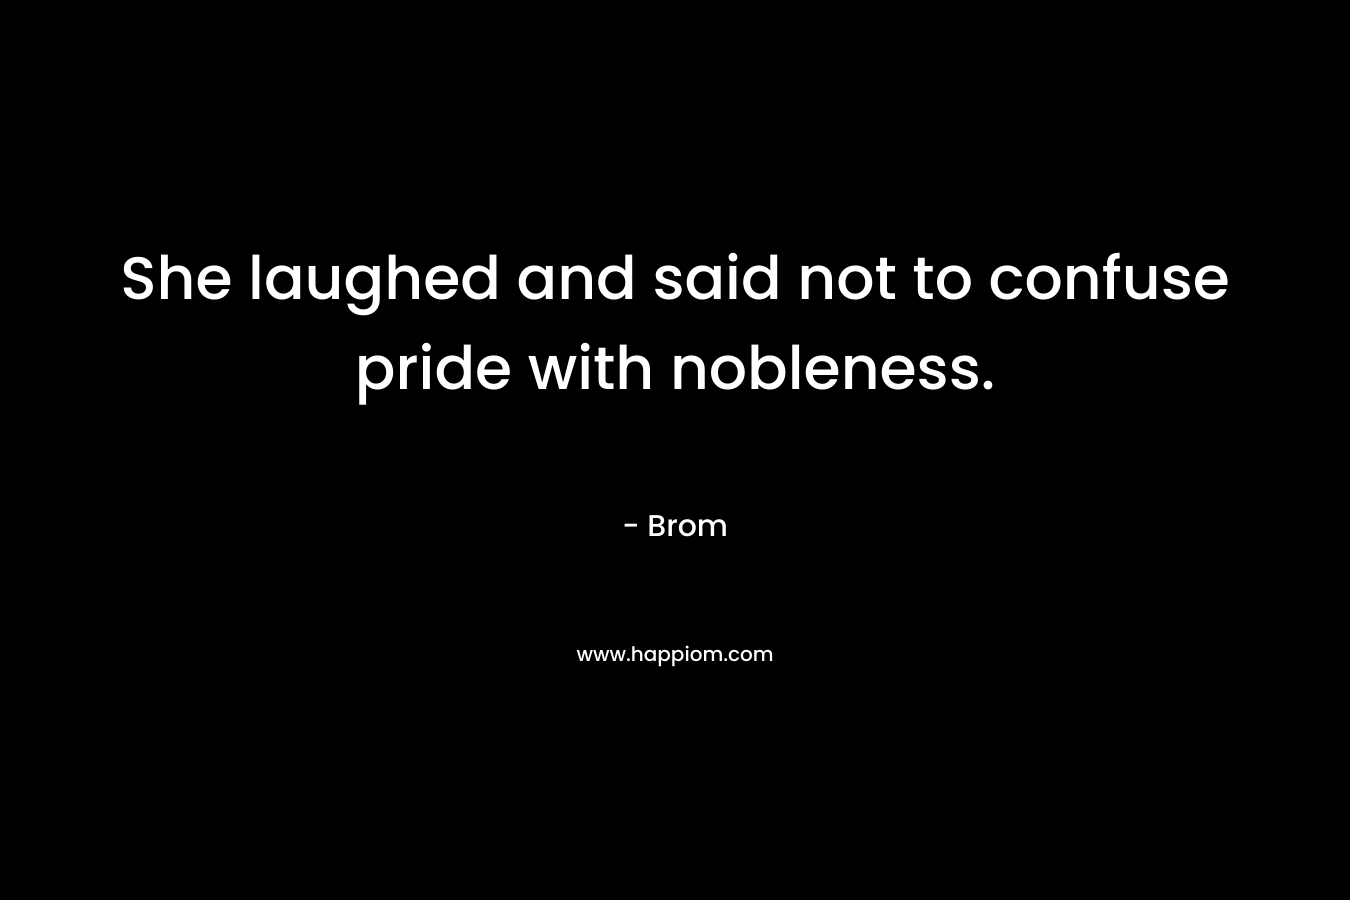 She laughed and said not to confuse pride with nobleness. – Brom